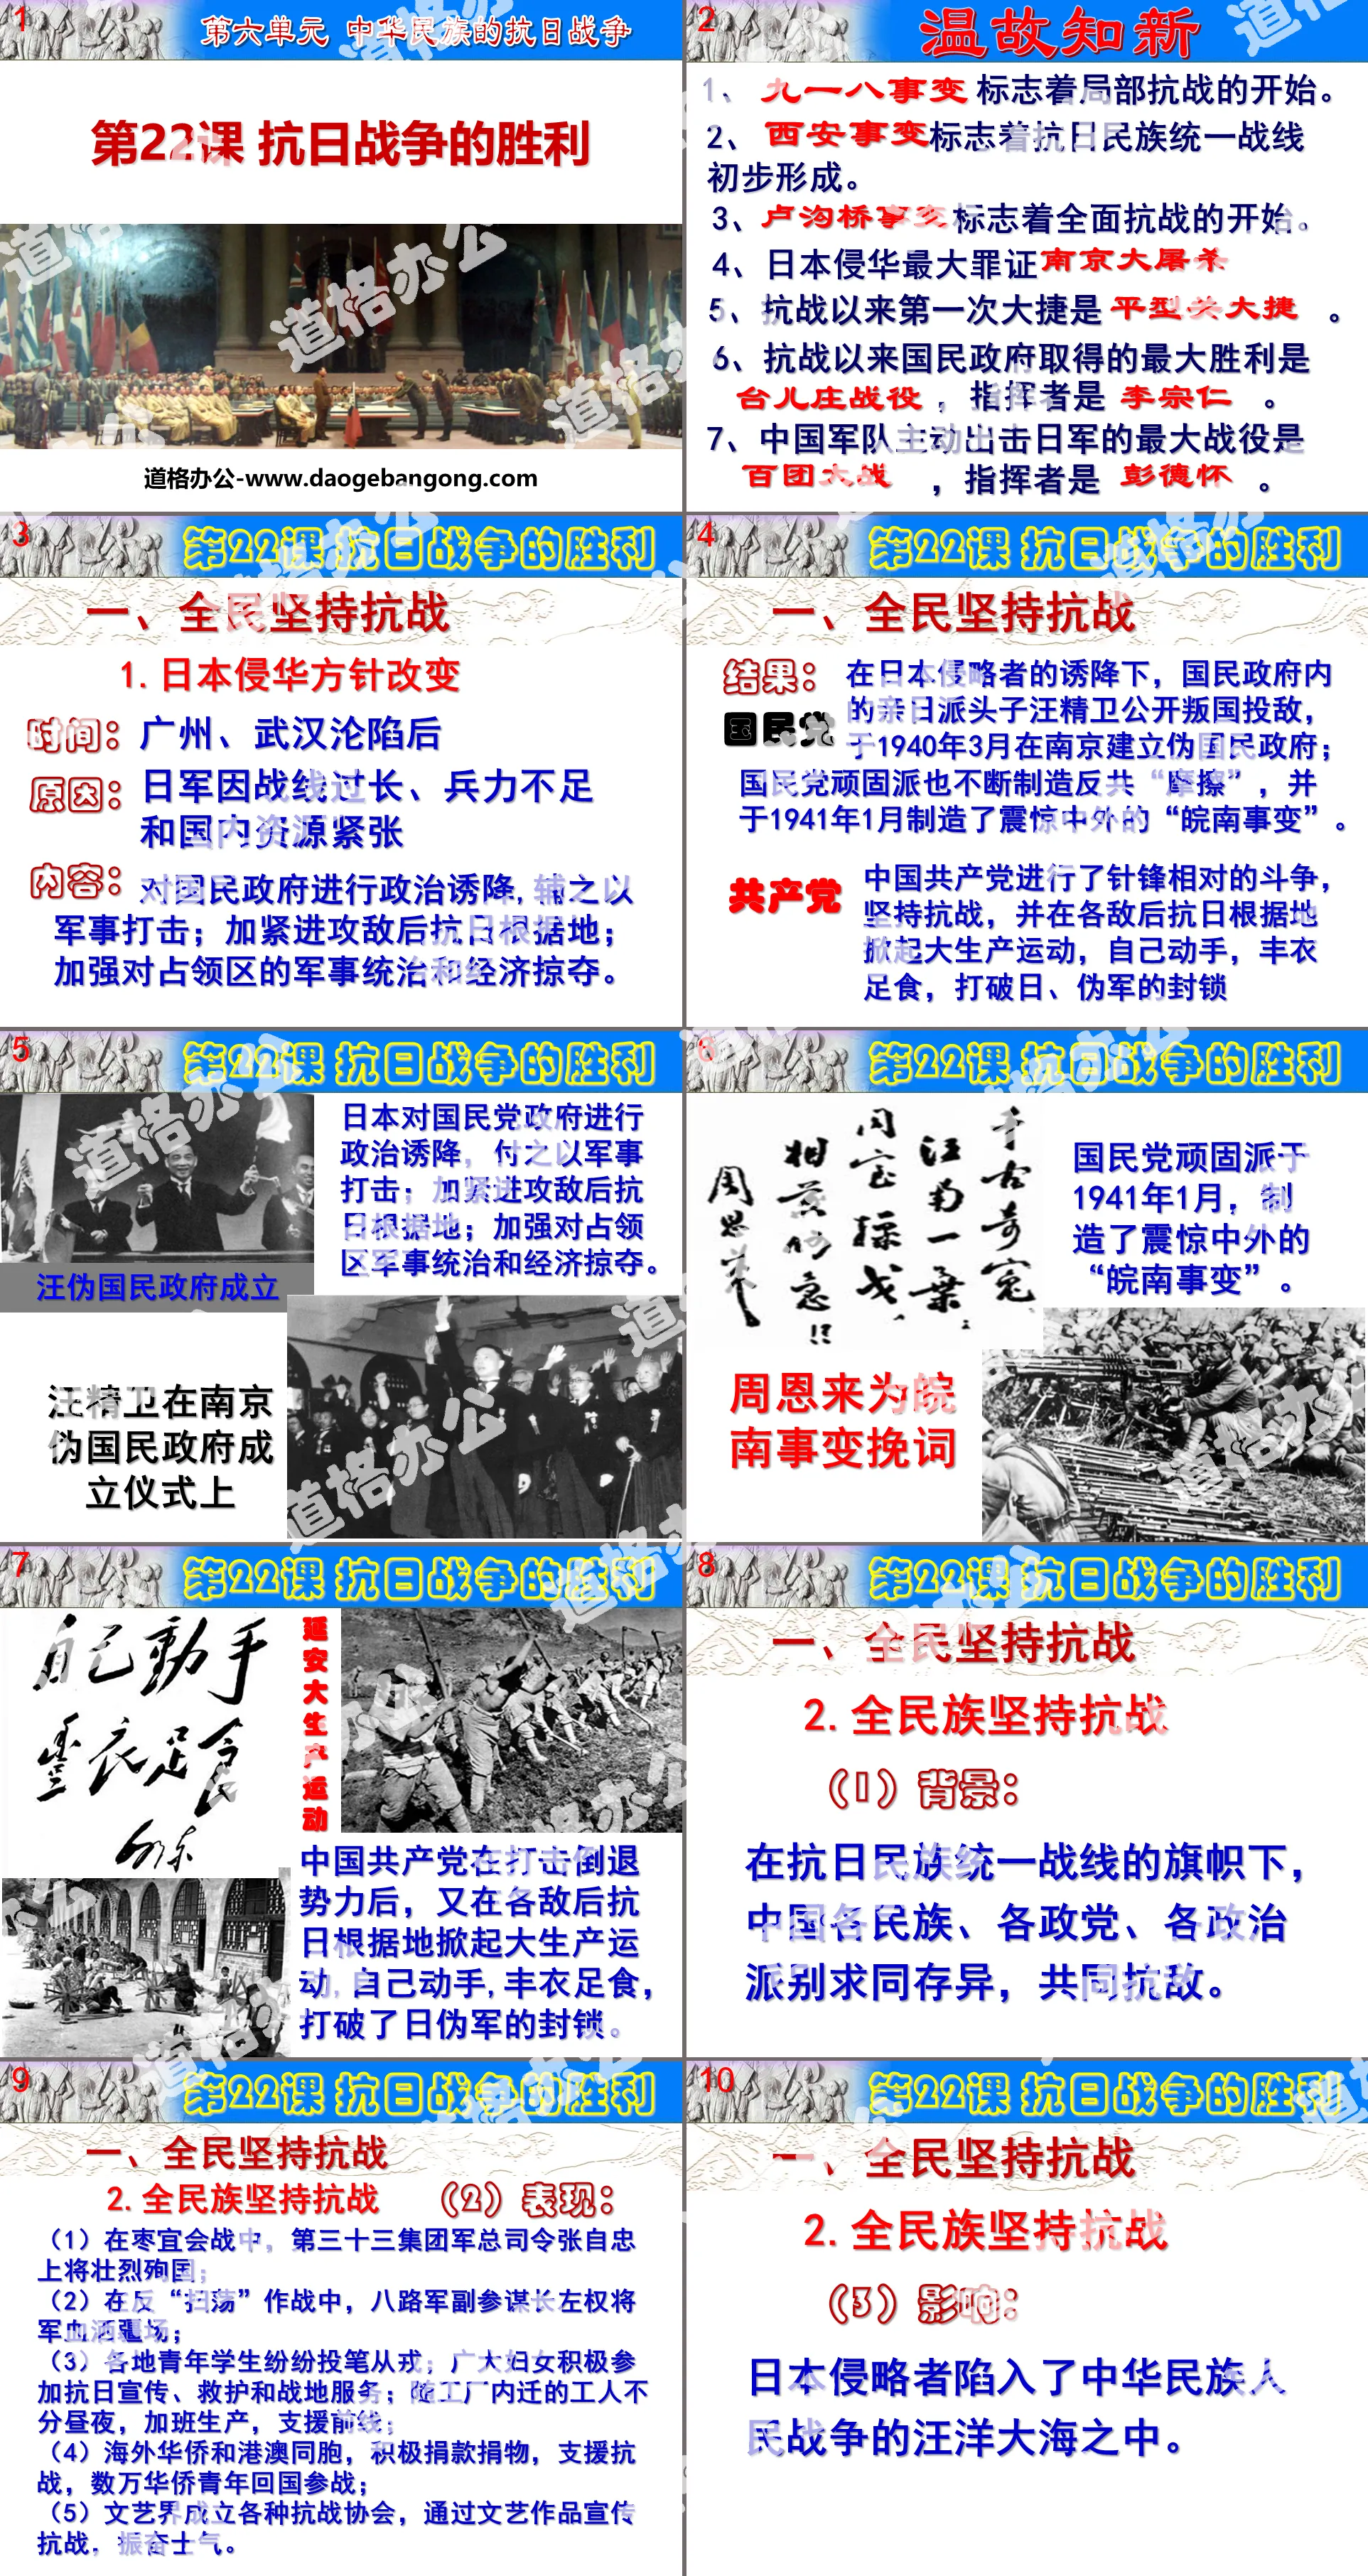 "Victory of the Anti-Japanese War" PPT download